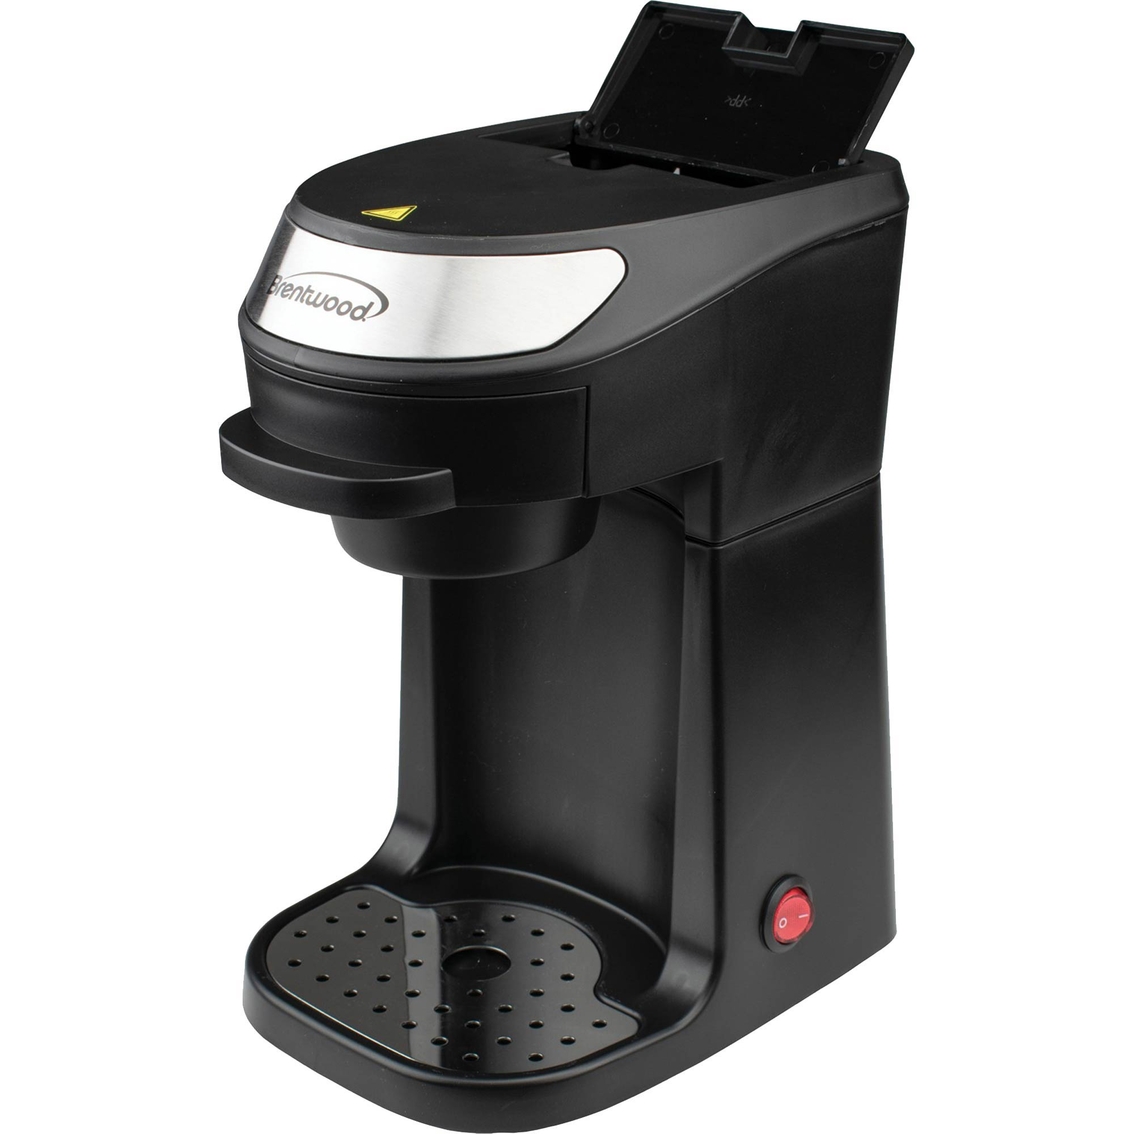 Brentwood Single Serve Coffee Maker with Mug - Image 3 of 4